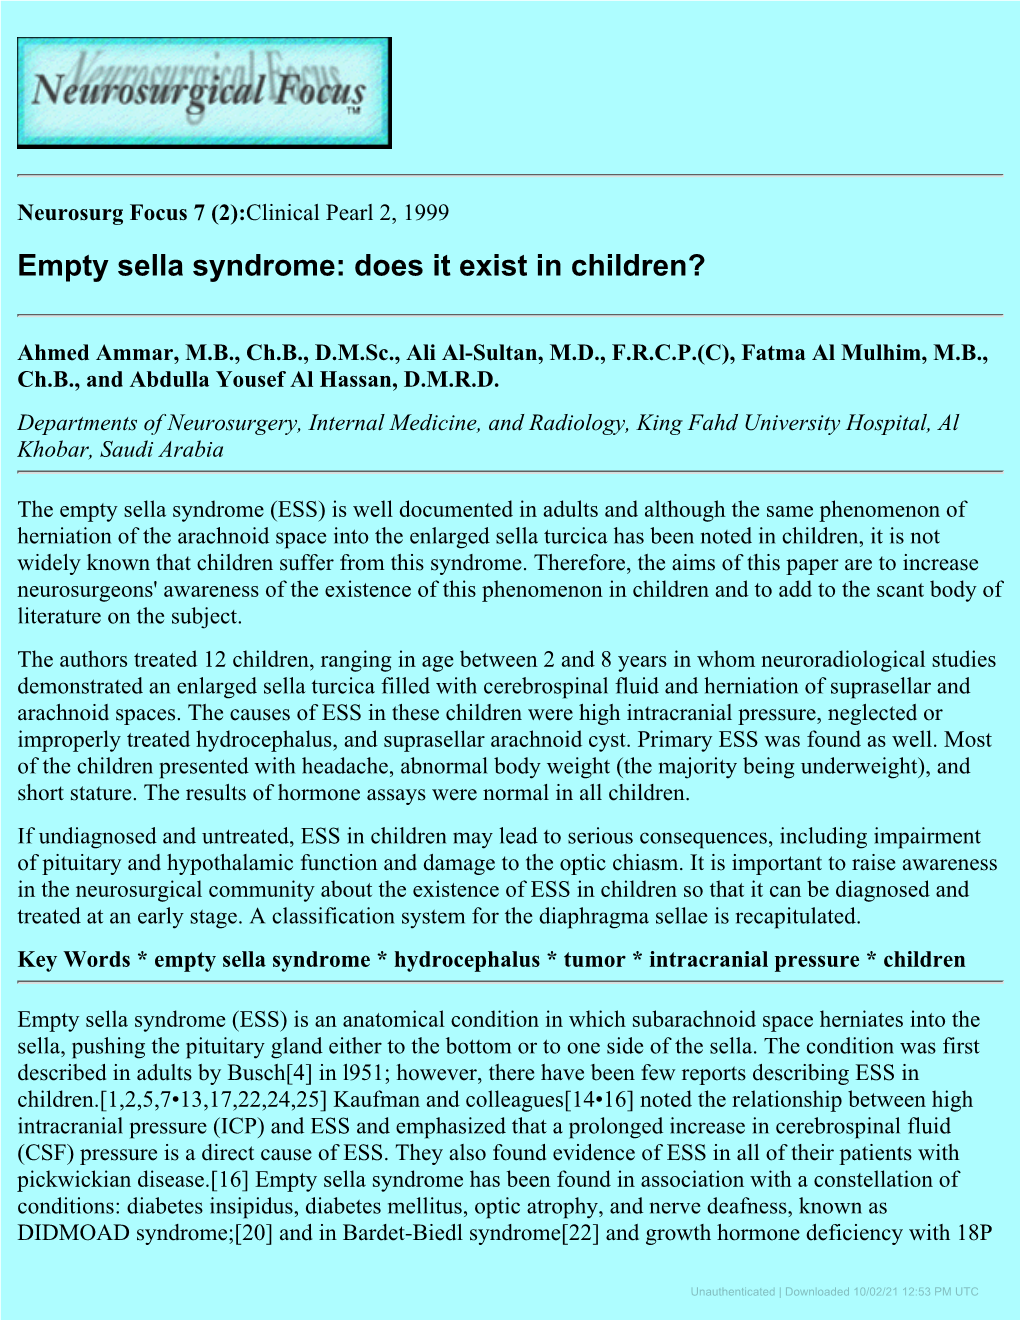 Empty Sella Syndrome: Does It Exist in Children?